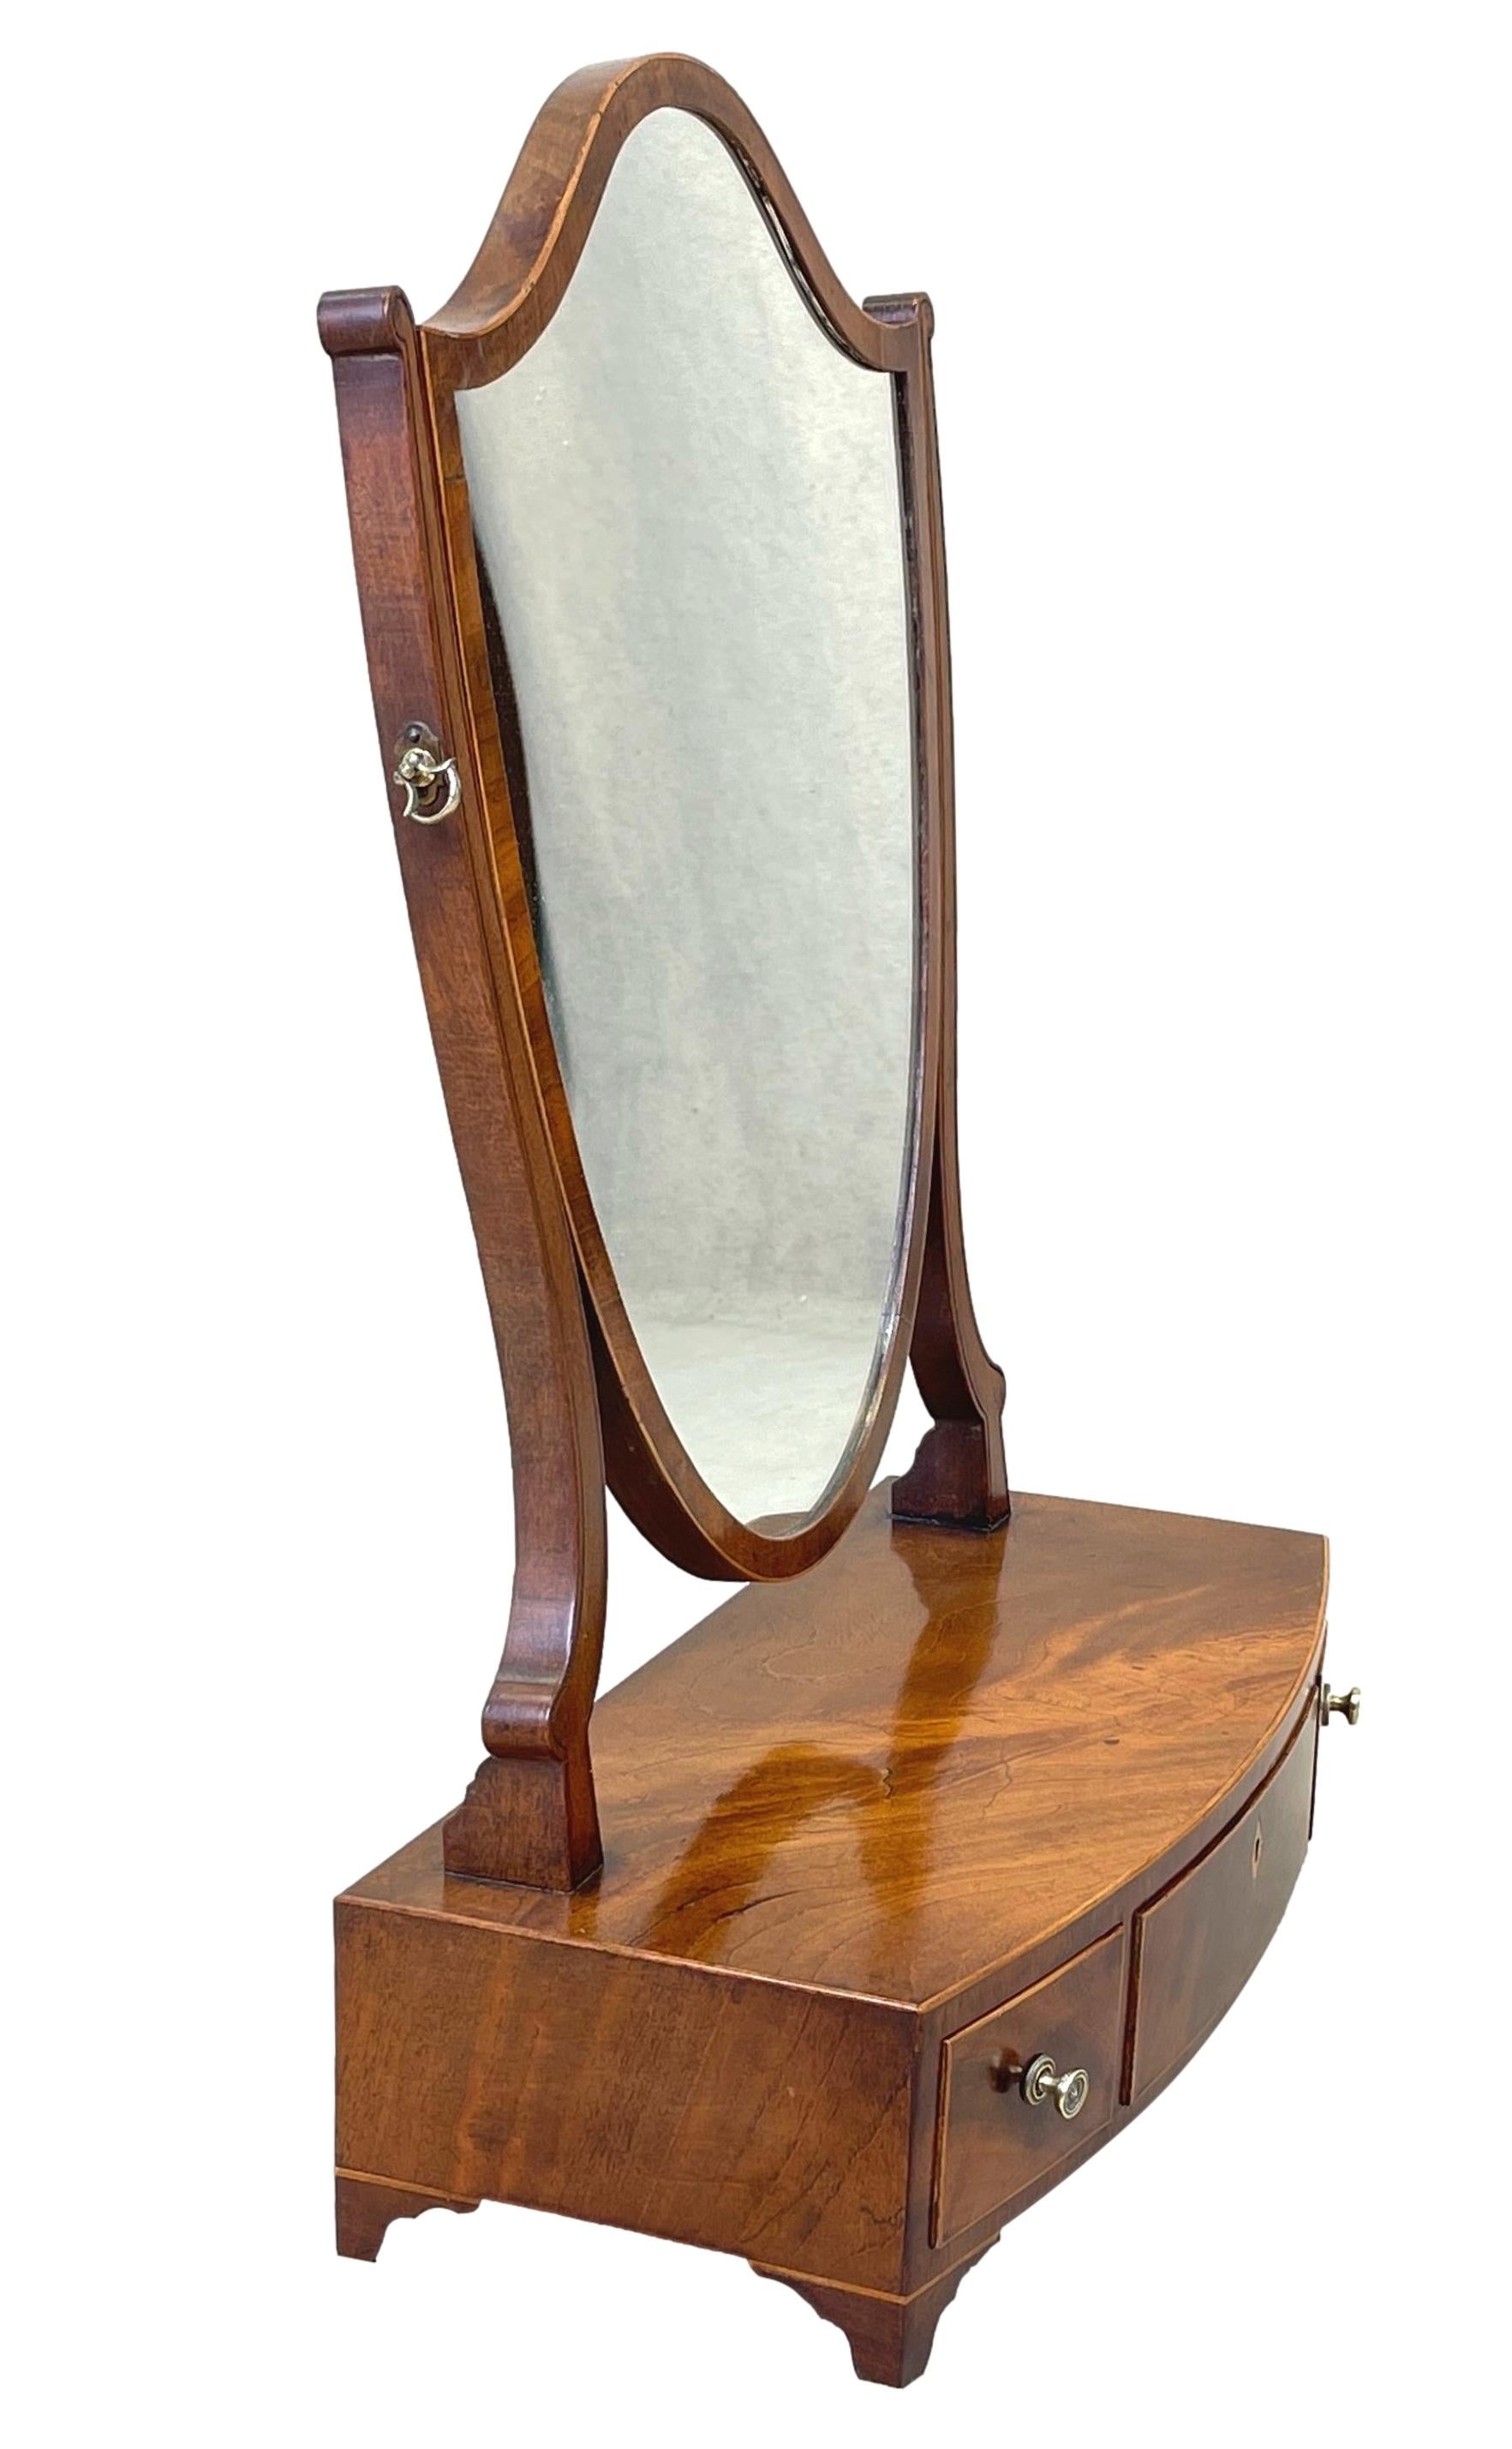 A Very Good Quality Late 18th Century Mahogany Georgian Dressing Table Mirror, With Elegant Shield Shaped Swing Plate, Over Well Figured Bowfronted Base With Three Drawers, Raised On Elegant Original Splayed Feet.


Dressing table mirrors, which can